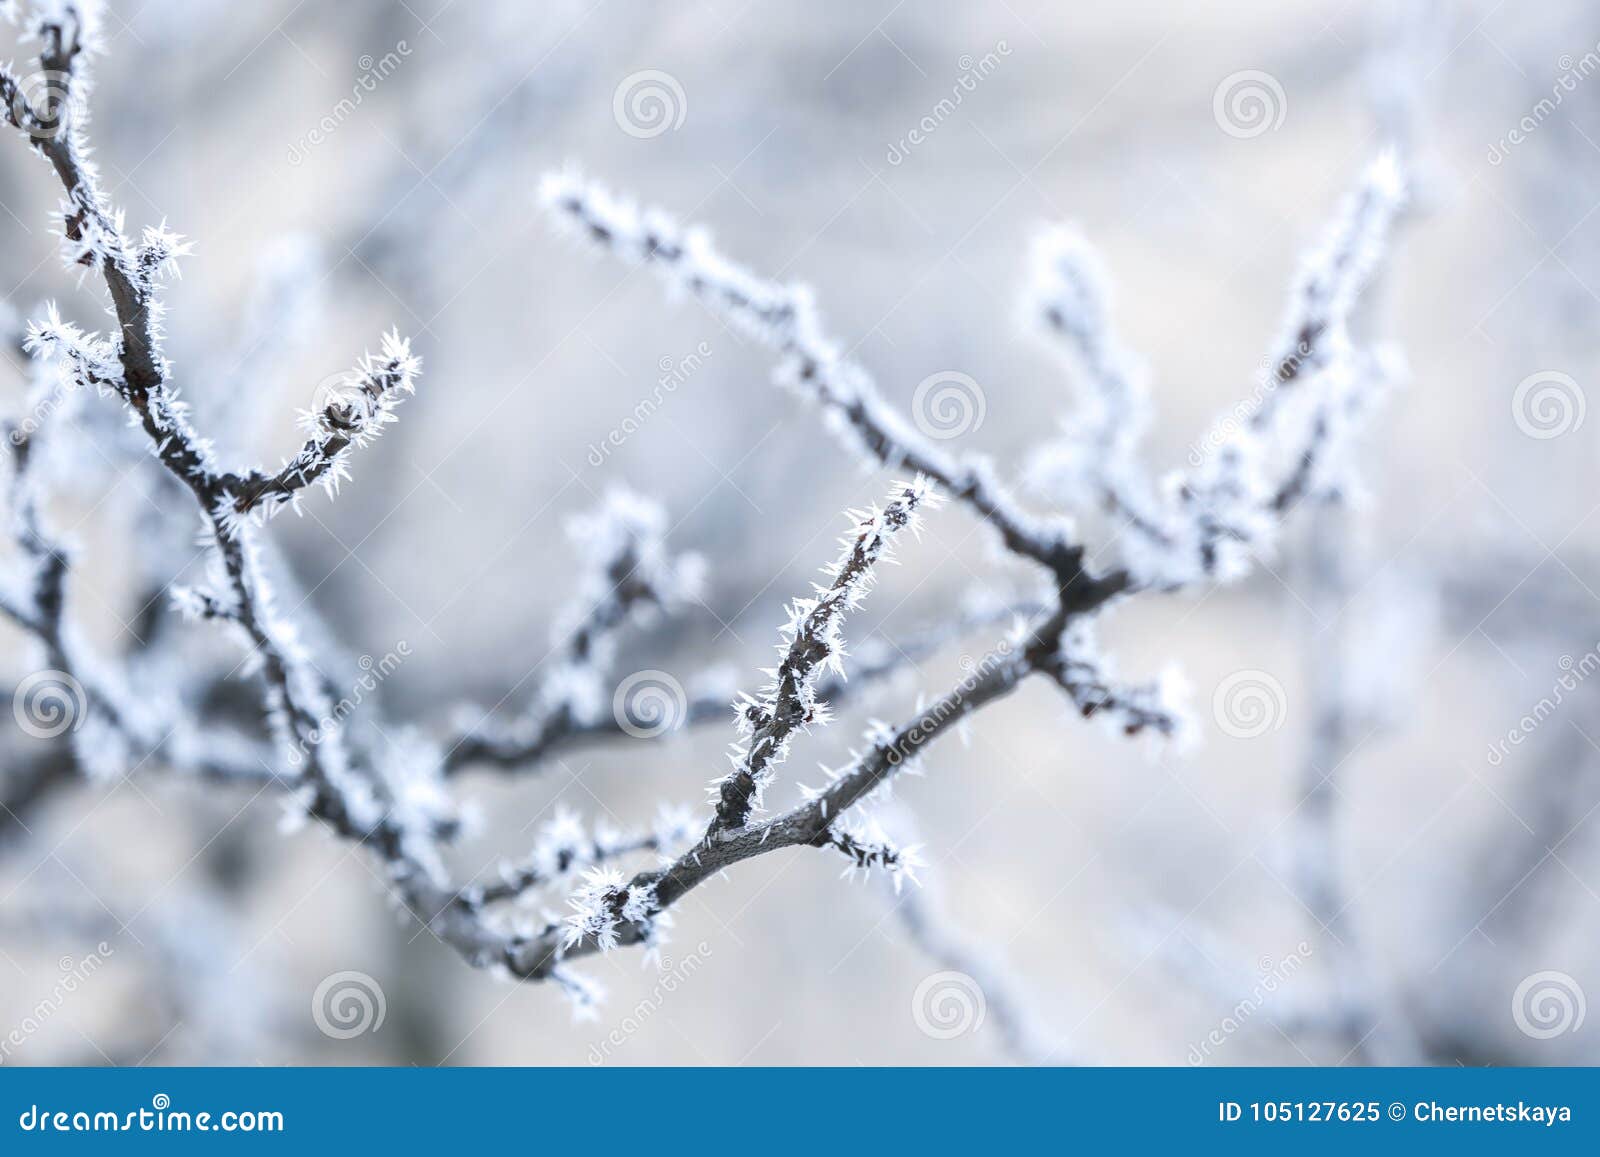 Charming Frozen Tree Branches Stock Image - Image of background ...